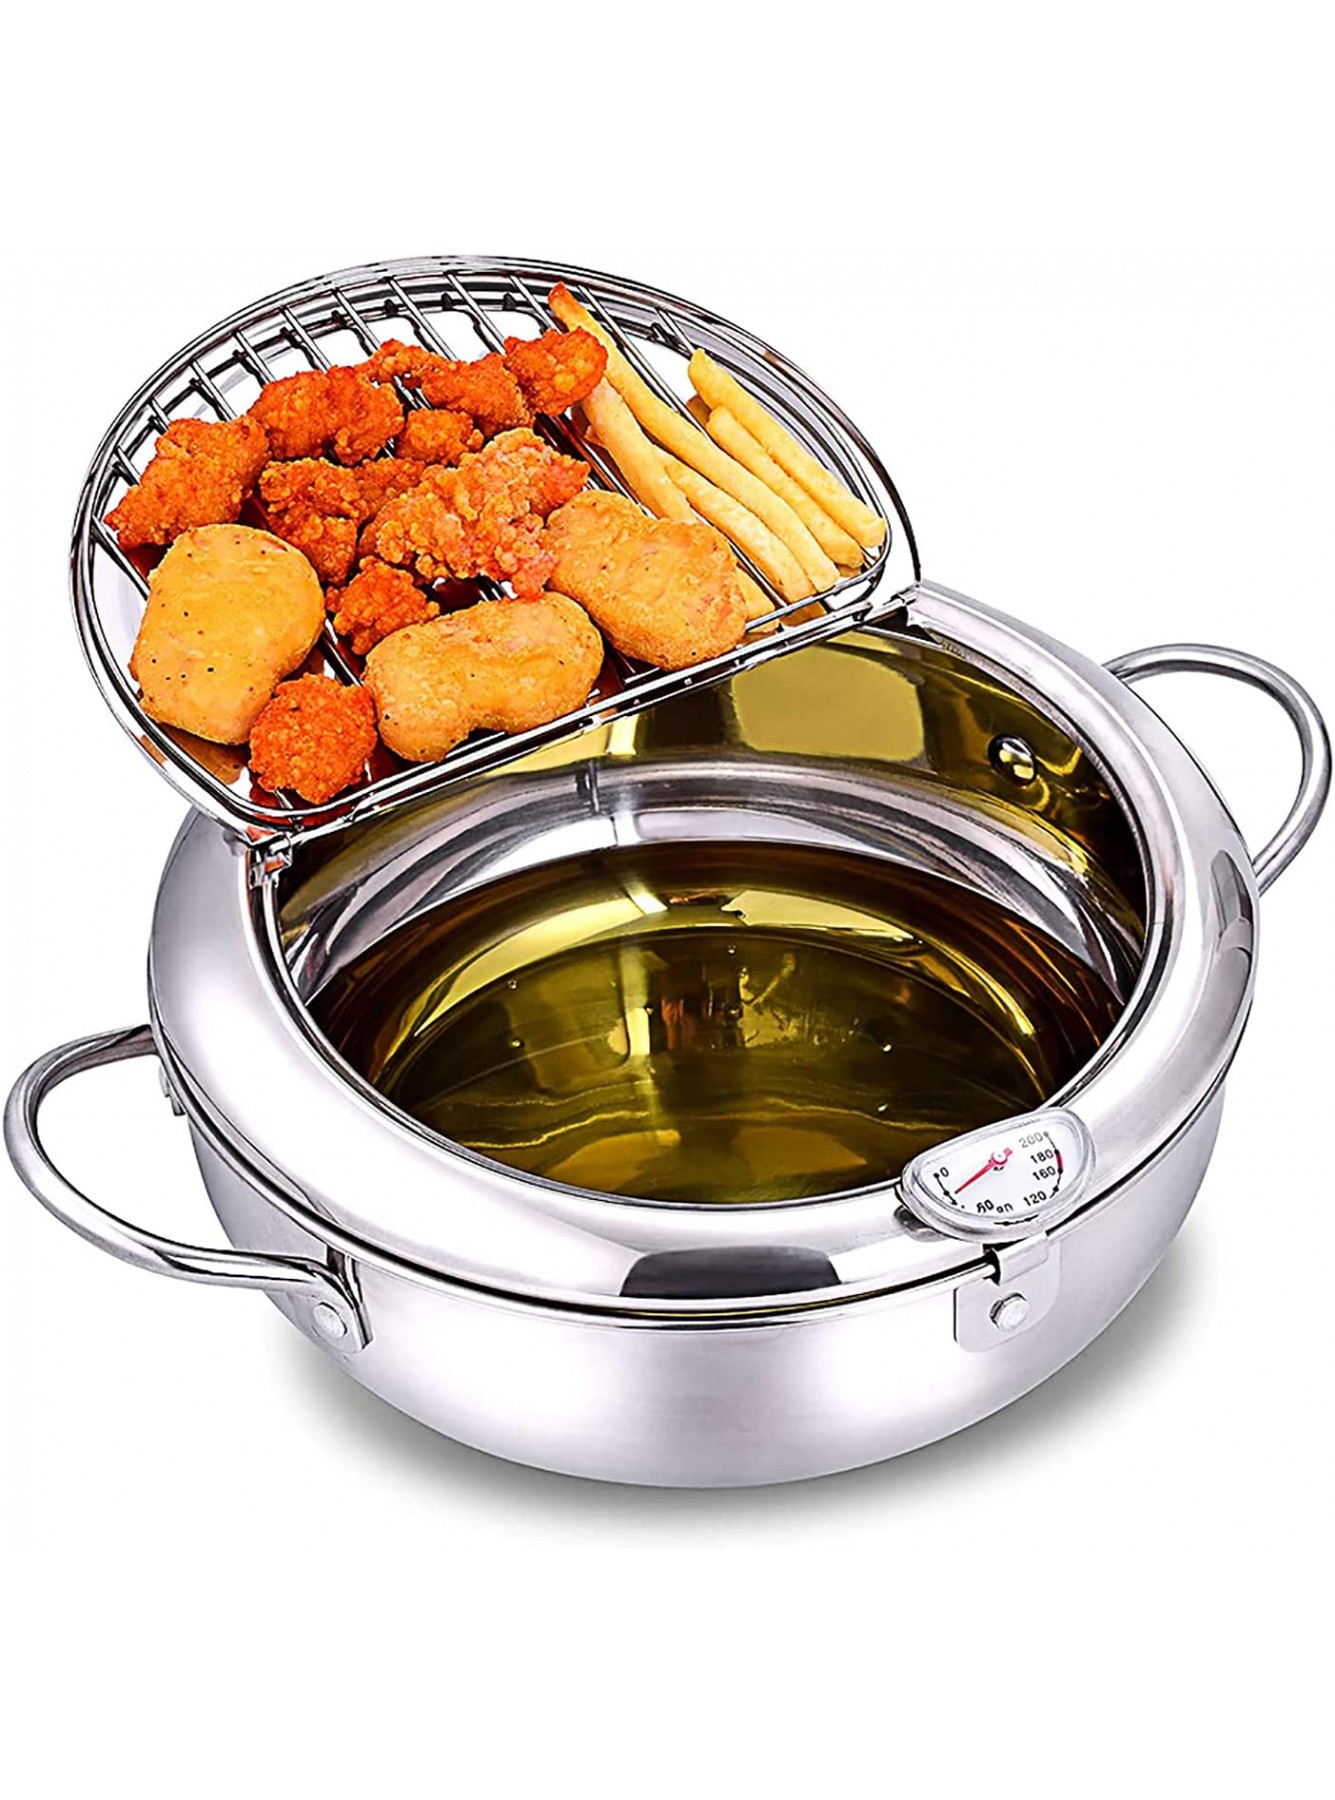 KIDYBELL Deep Fryer Pan 304 Stainless Steel Tempura Frying Pot Japanese Style Fryer With Thermometer，Lid and Oil Drip Rack24cm 9.4inch B08SQKKQRM